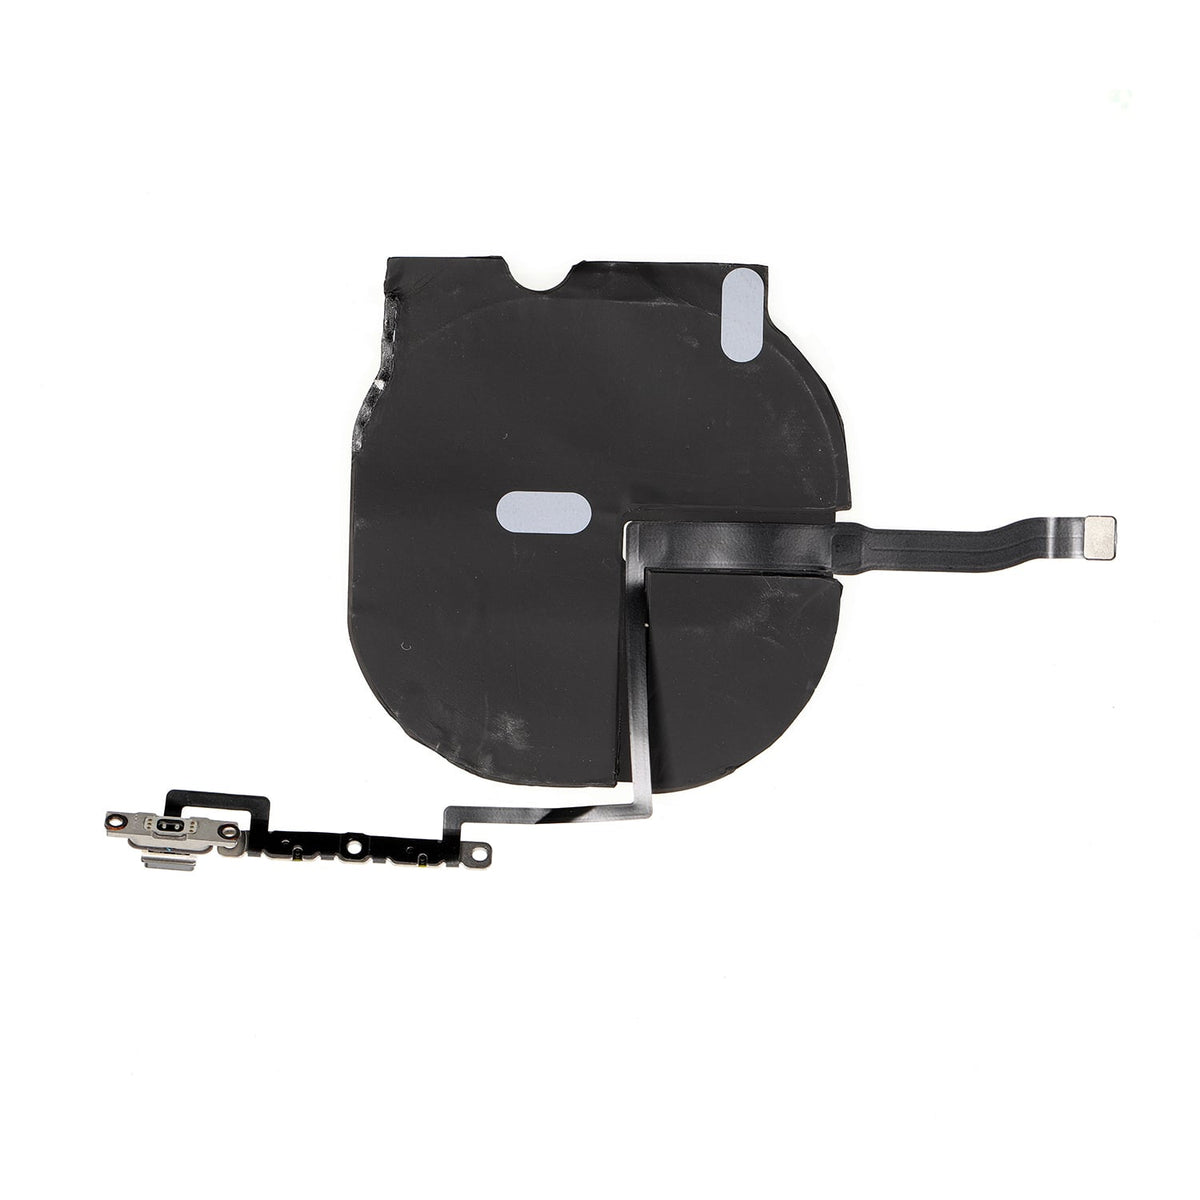 VOLUME BUTTON FLEX CABLE WITH WIRELESS CHARGER FOR IPHONE 11 PRO